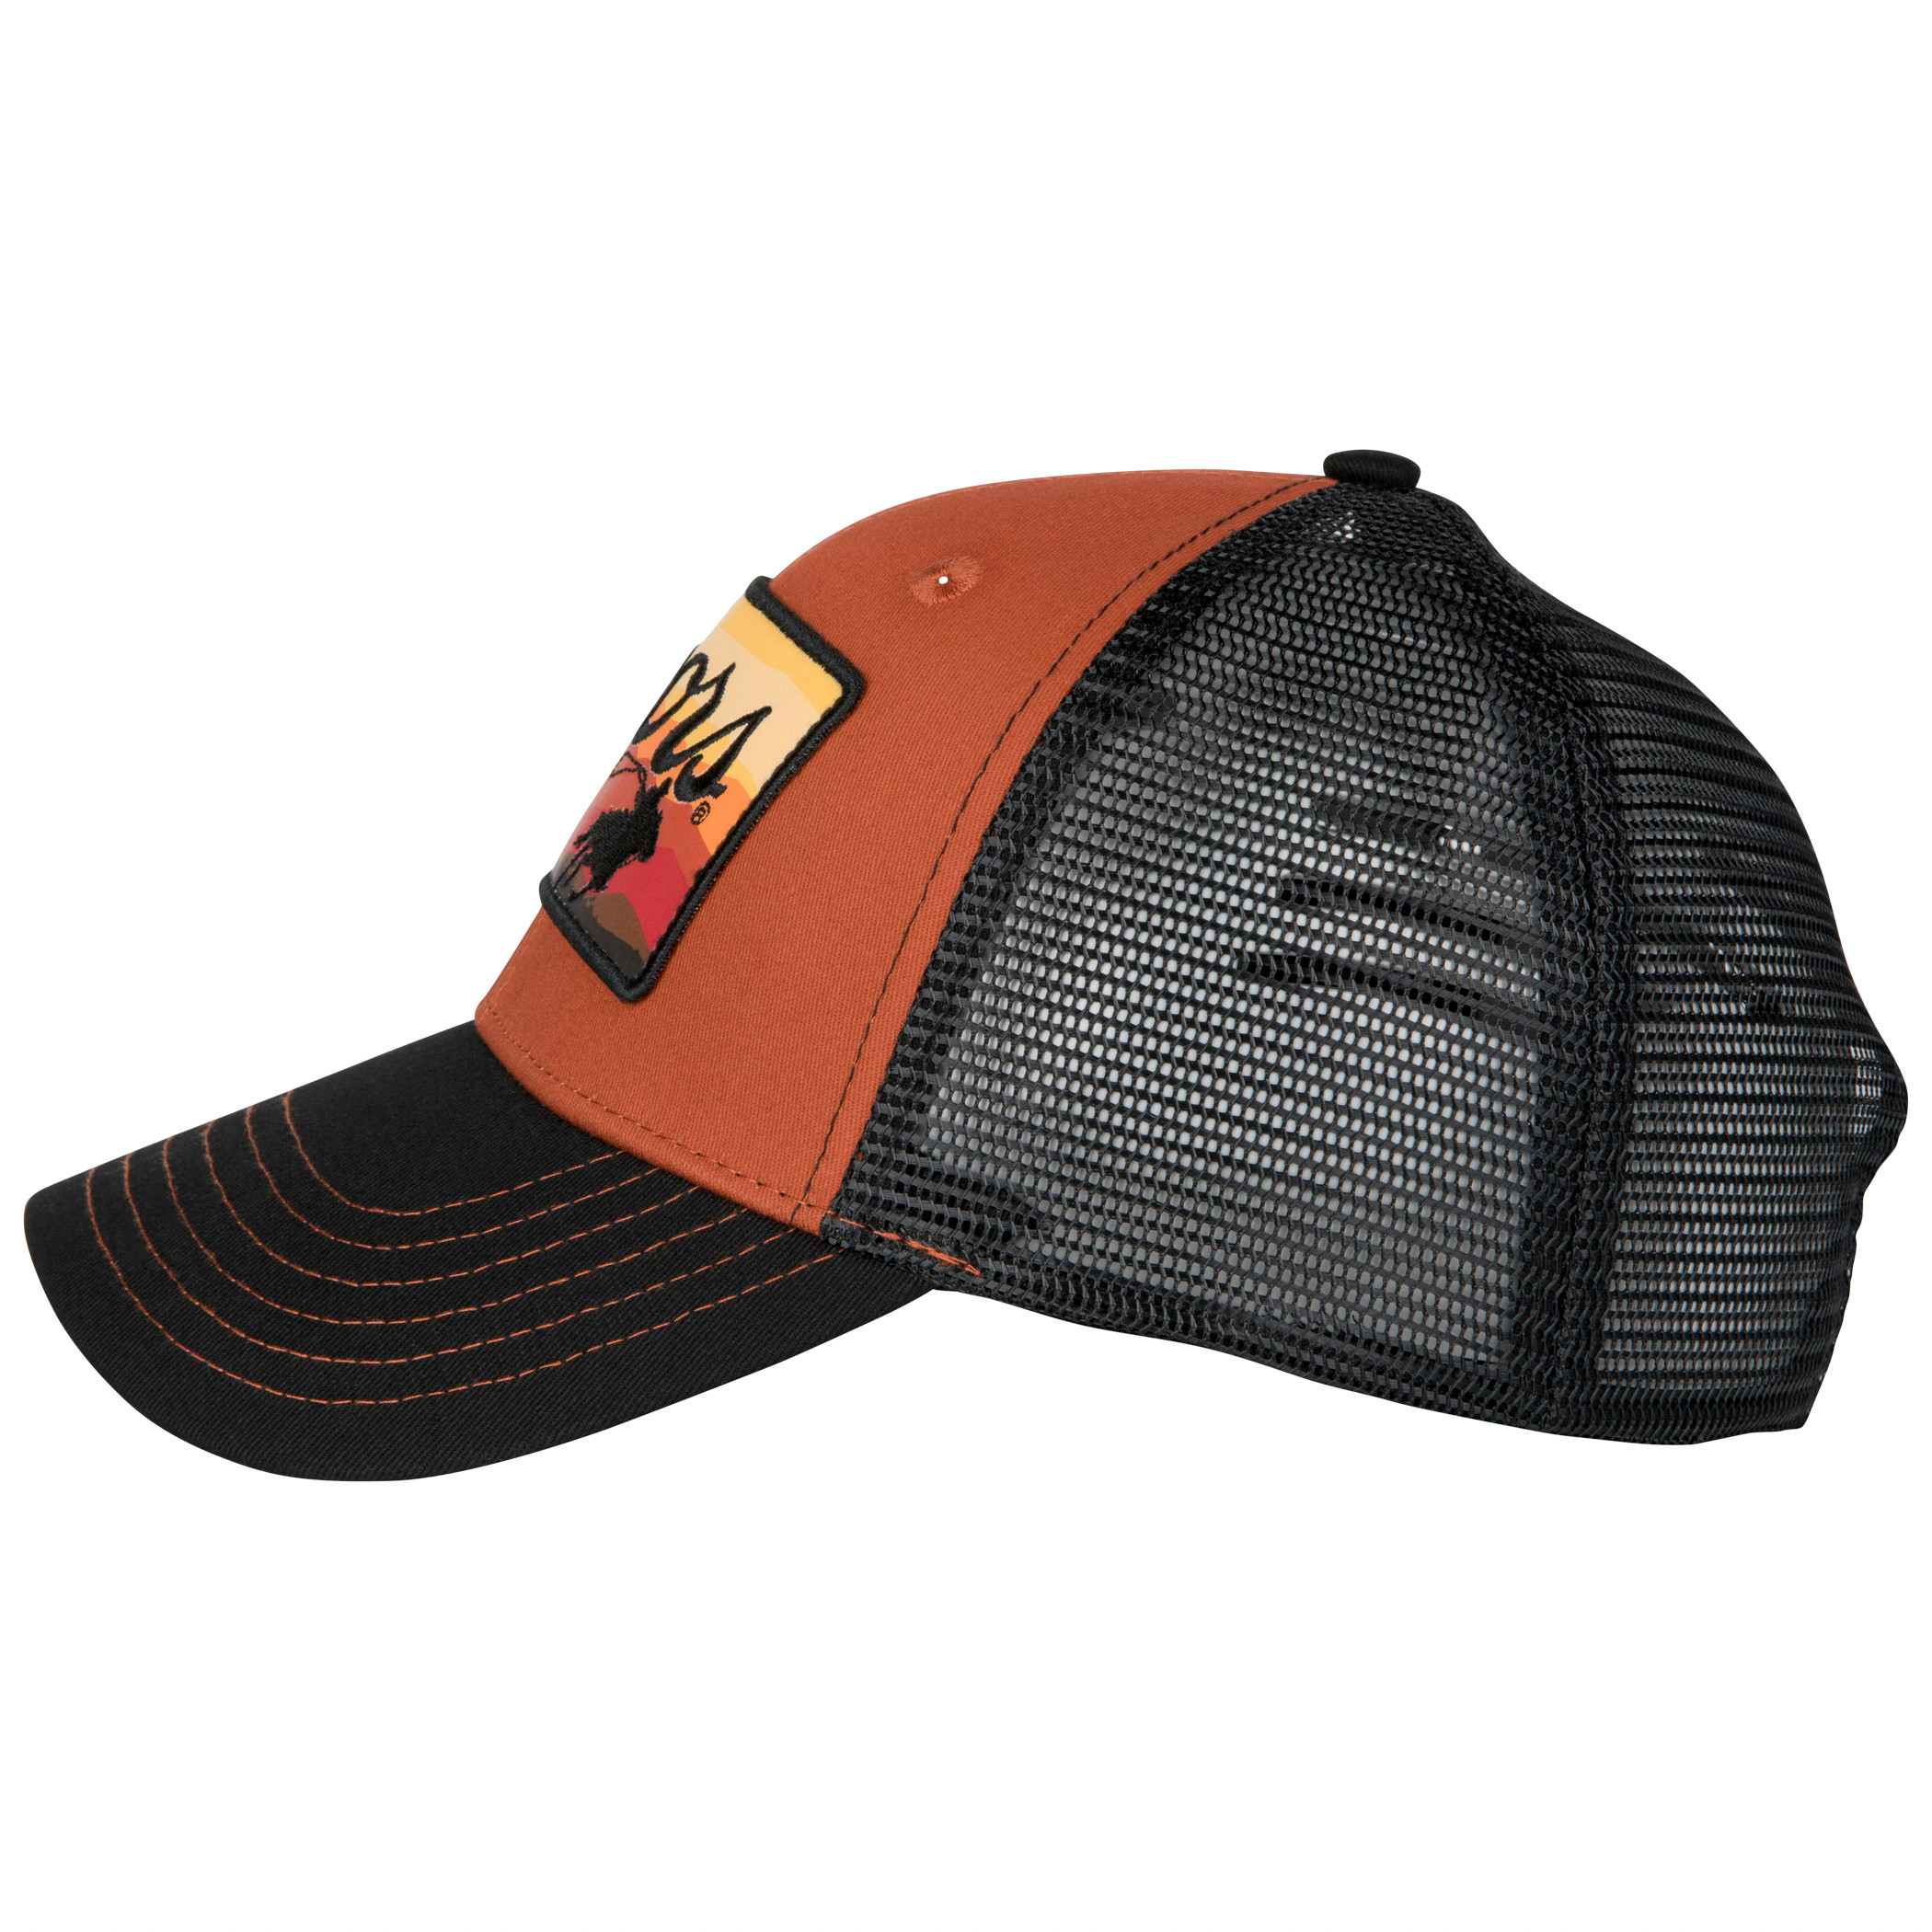 Coors Western Sunset Patch Adjustable Trucker Hat